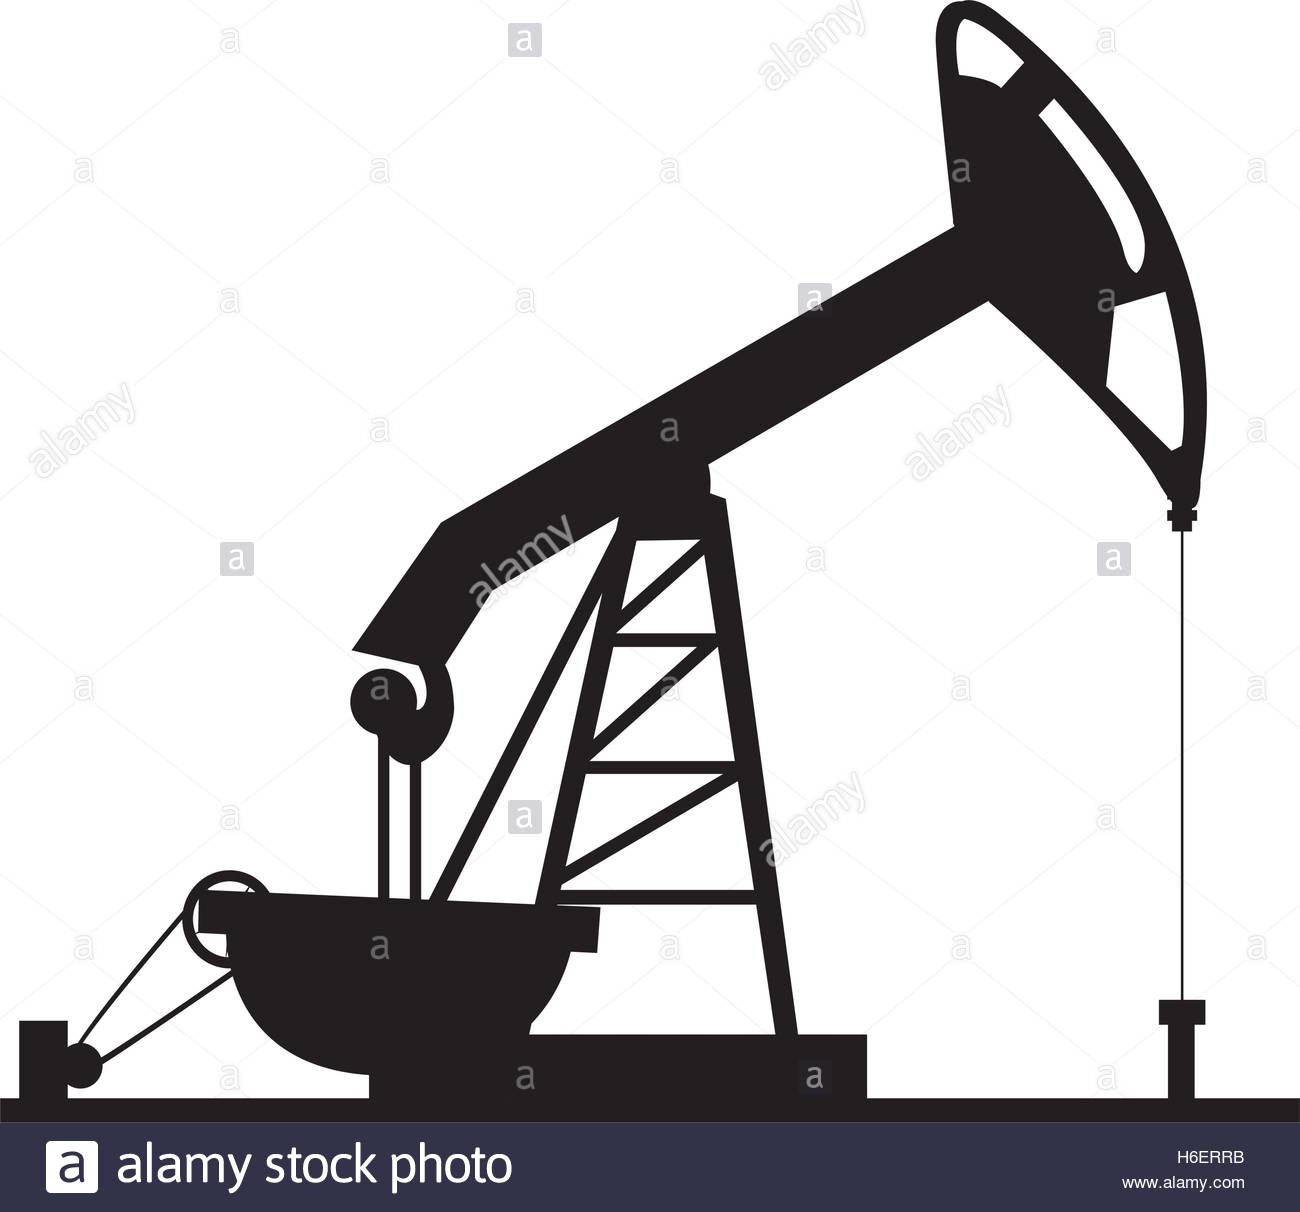 Energy, industry, oil, rig icon | Icon search engine